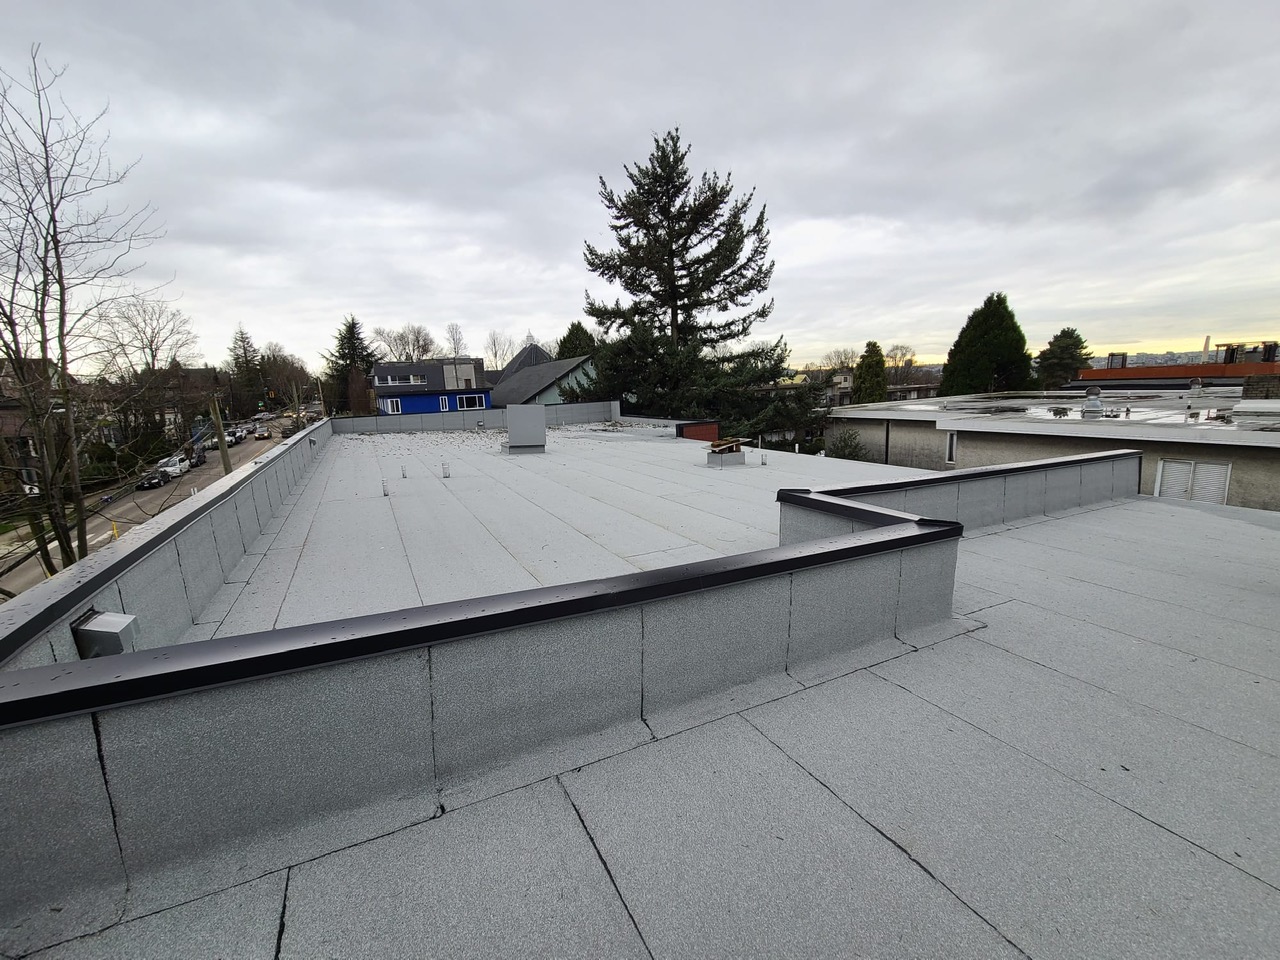 Commercial Flat Roof Options in Vancouver, BC